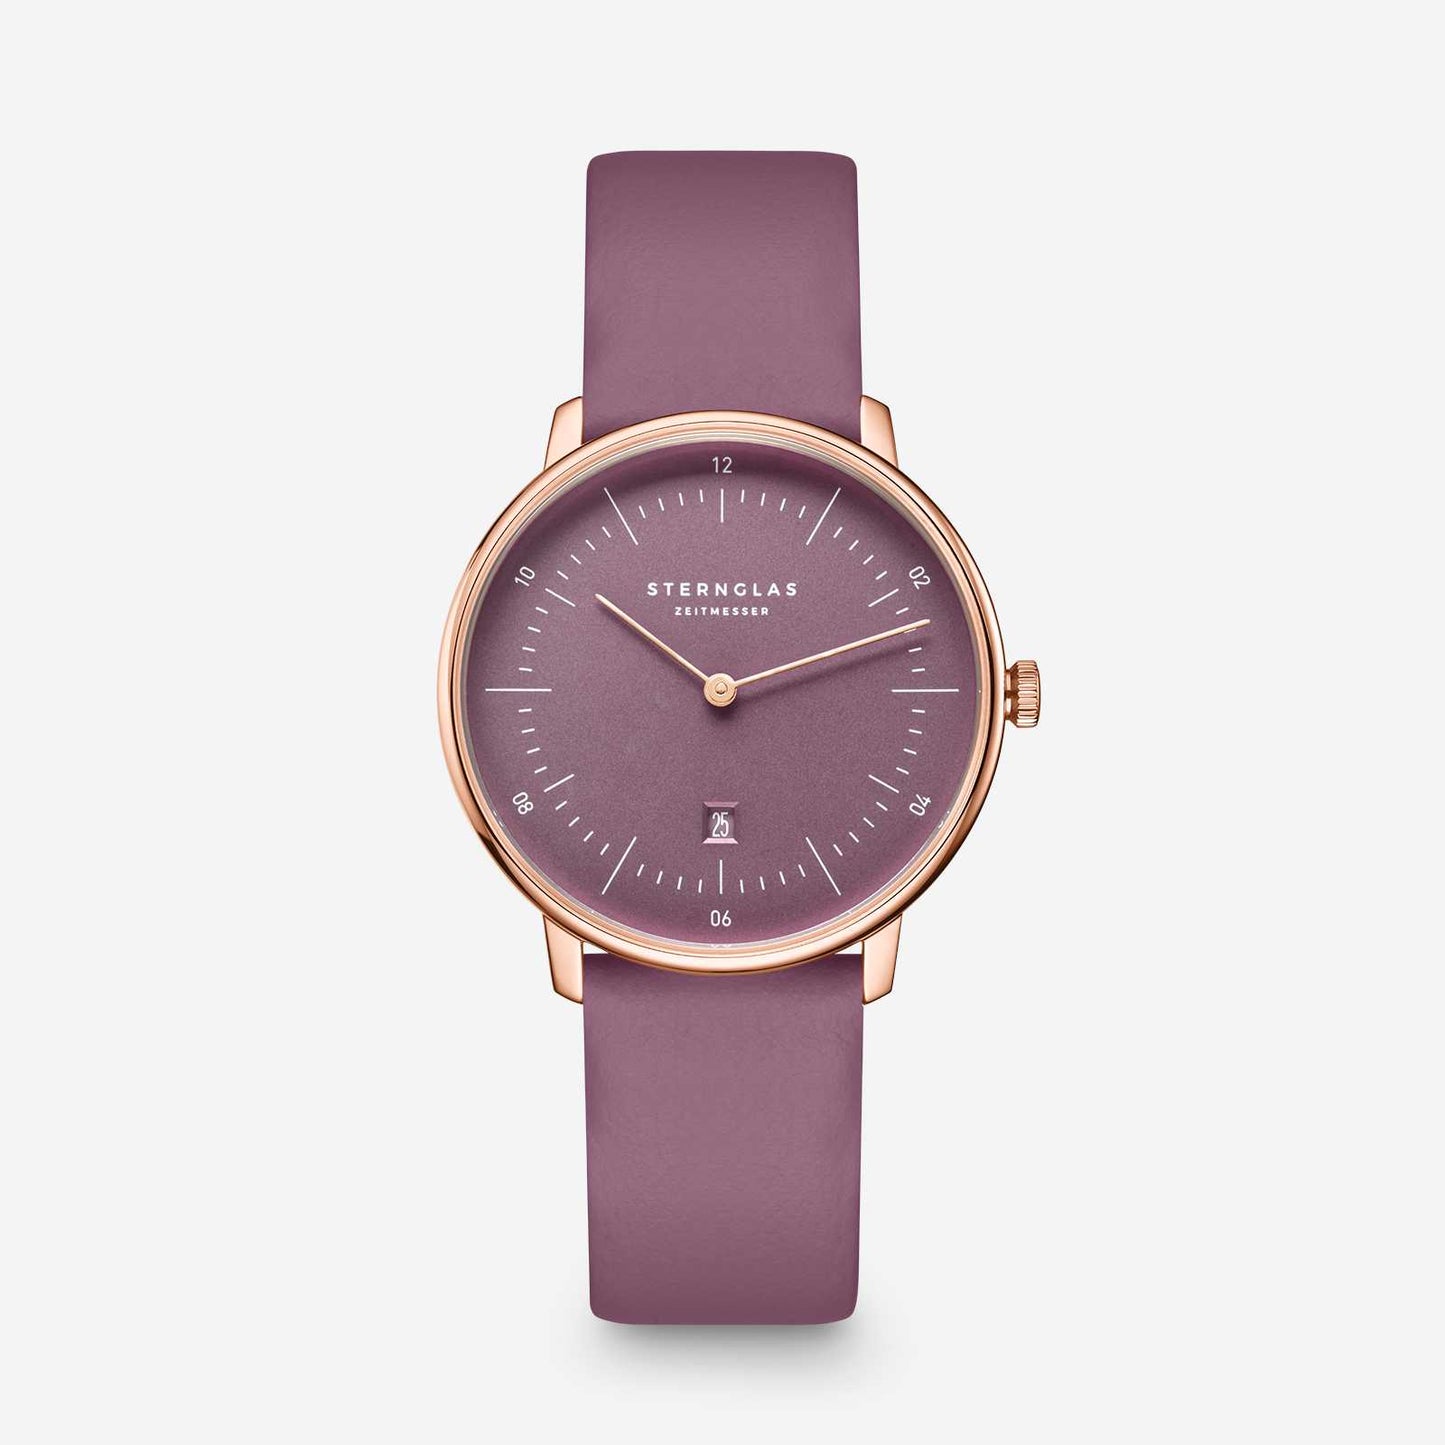 popup|Subtle floral colourfulness|The dial with elegant satin finish is colour-coordinated with the fine leather strap. A decorative highlight for your wrist without being too overpowering.